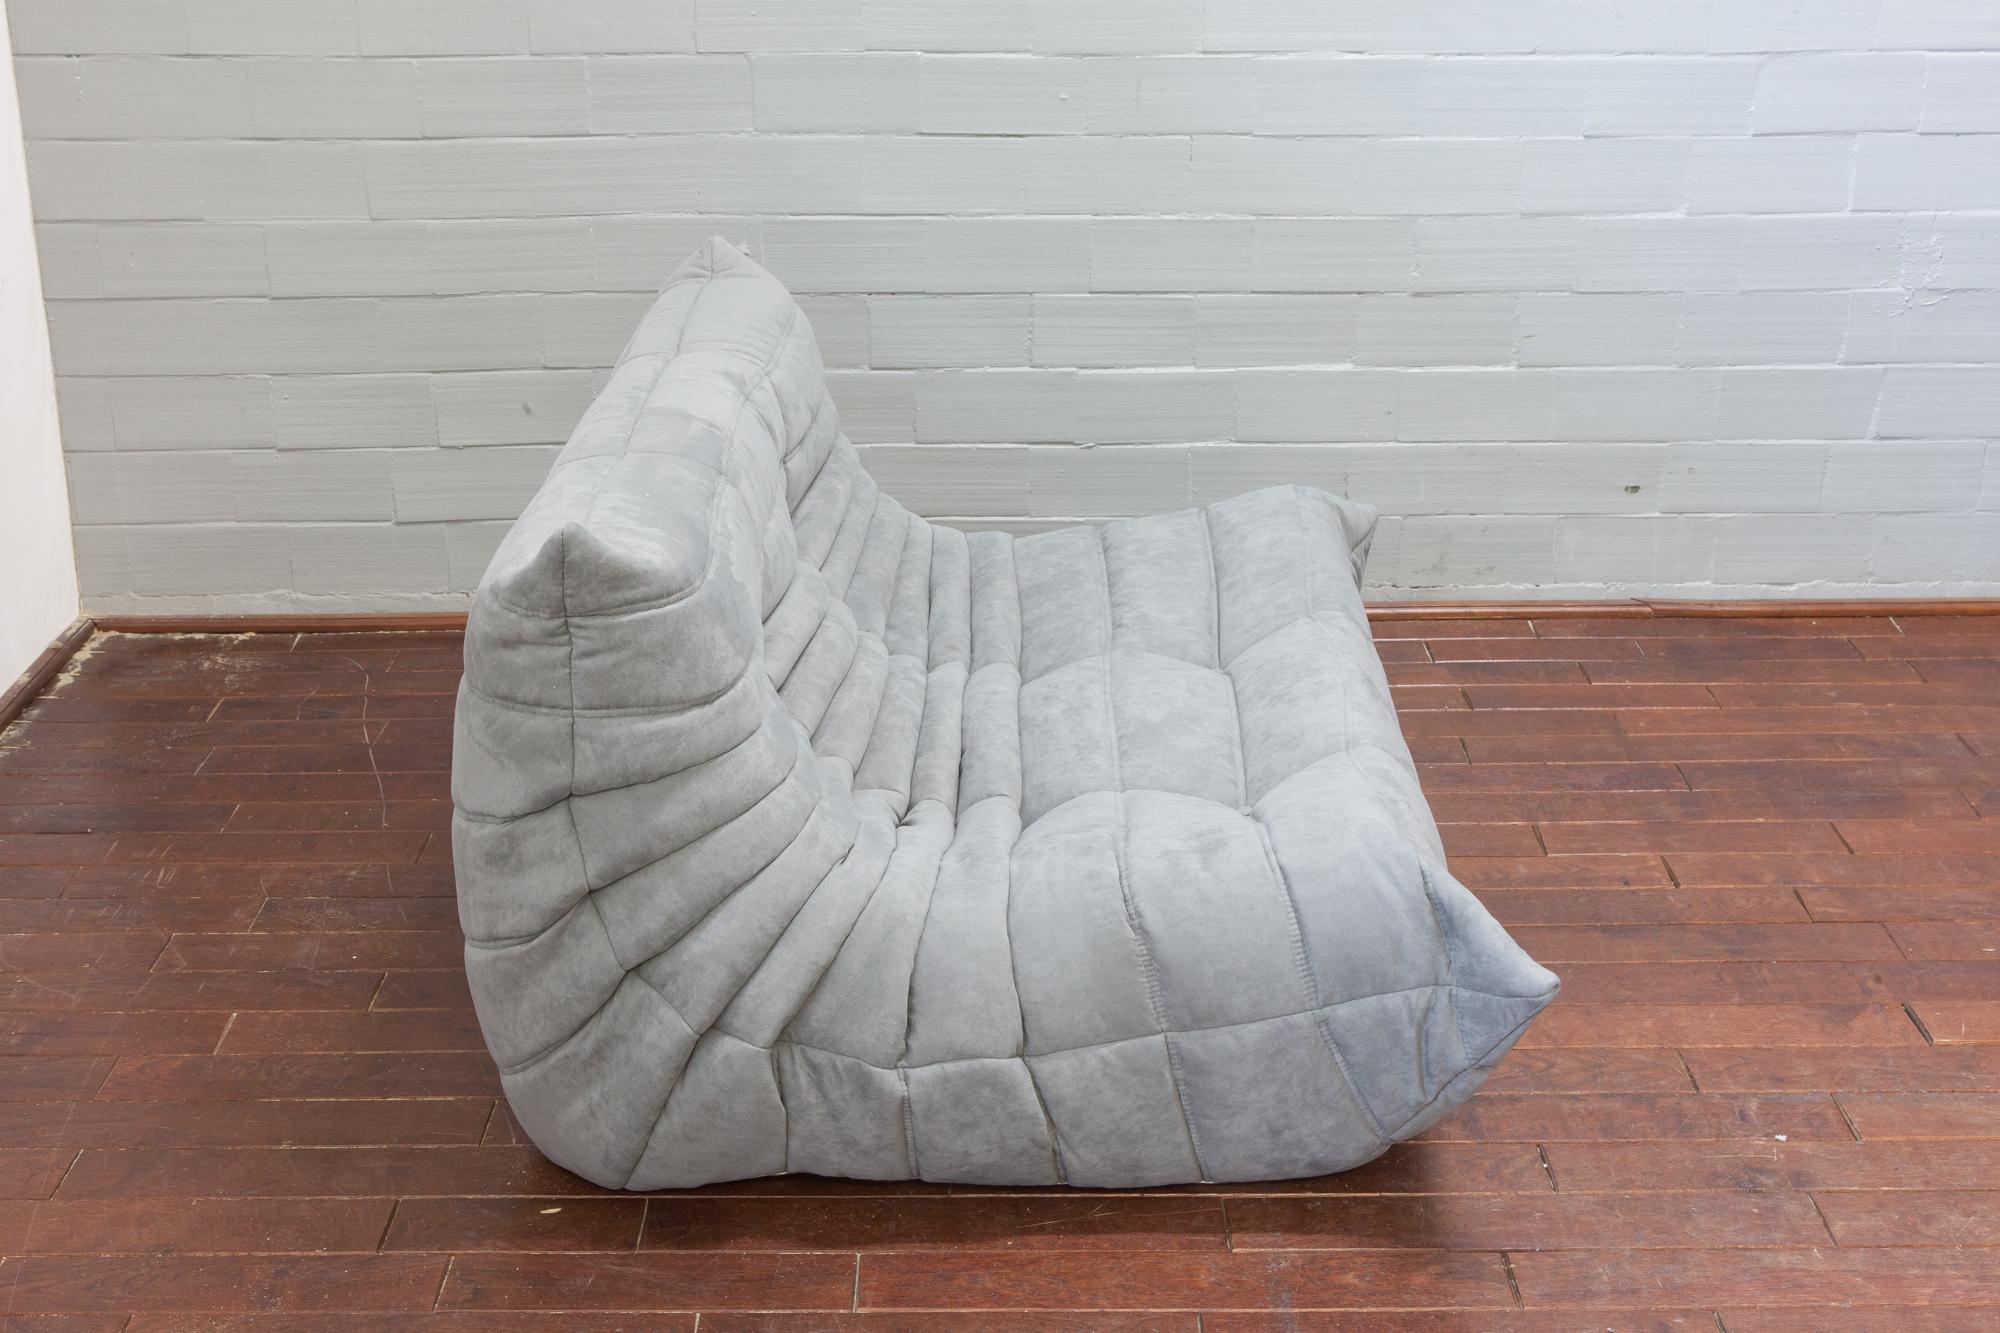 This Togo two-seat couch was designed by Michel Ducaroy in 1973 and was manufactured by Ligne Roset in France. It has been reupholstered in new light grey microfibre (131 x 102 x 70 cm). It has the original Ligne Roset logo and genuine Ligne Roset